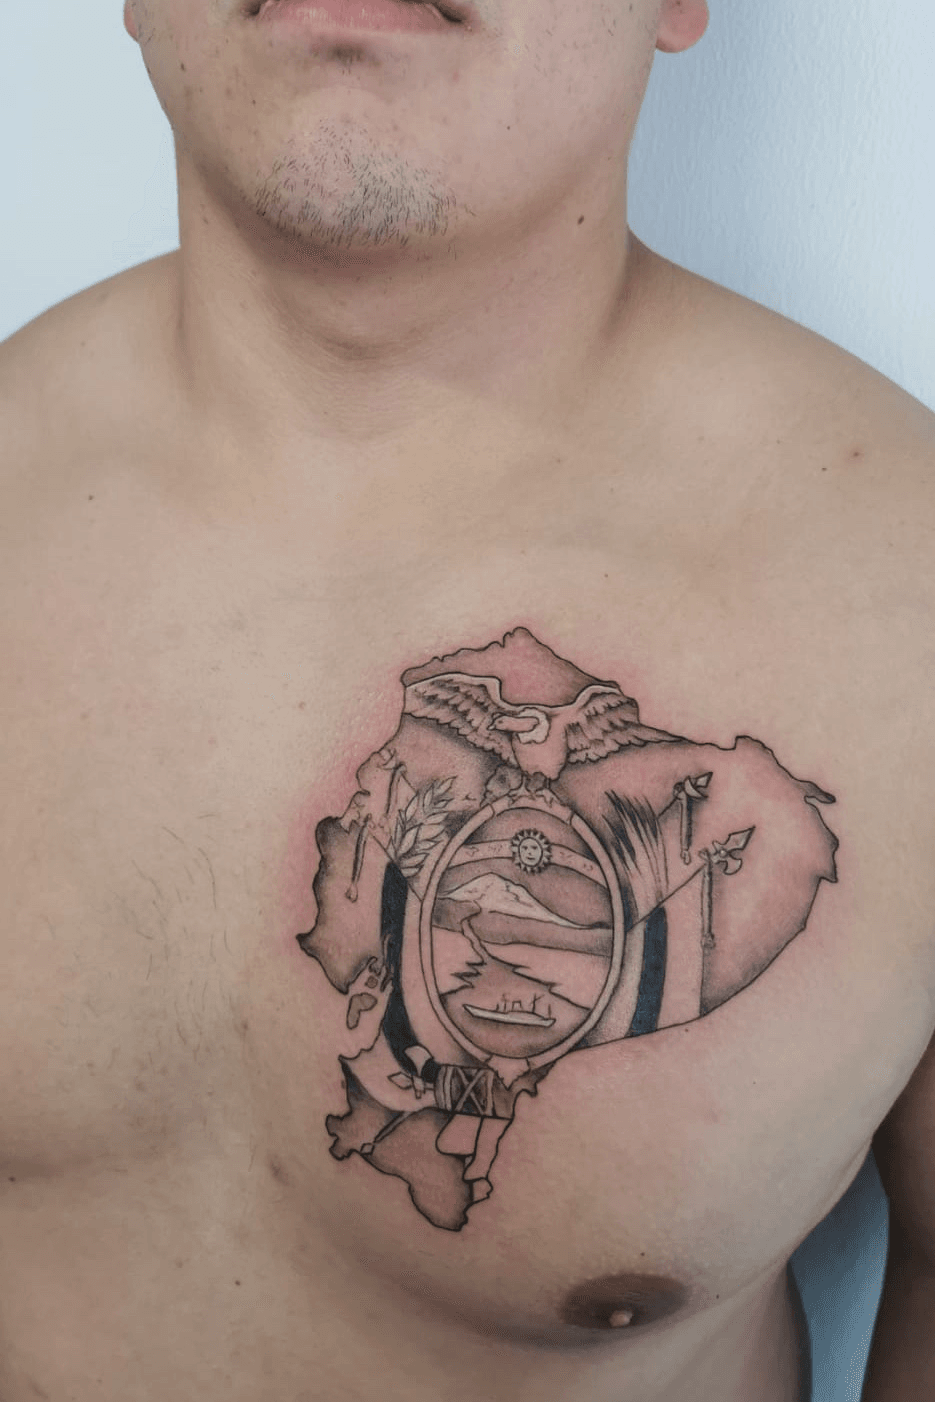 Done by juanrodrigueztattoo in Skull of Ages Quito Ecuador  rtattoos